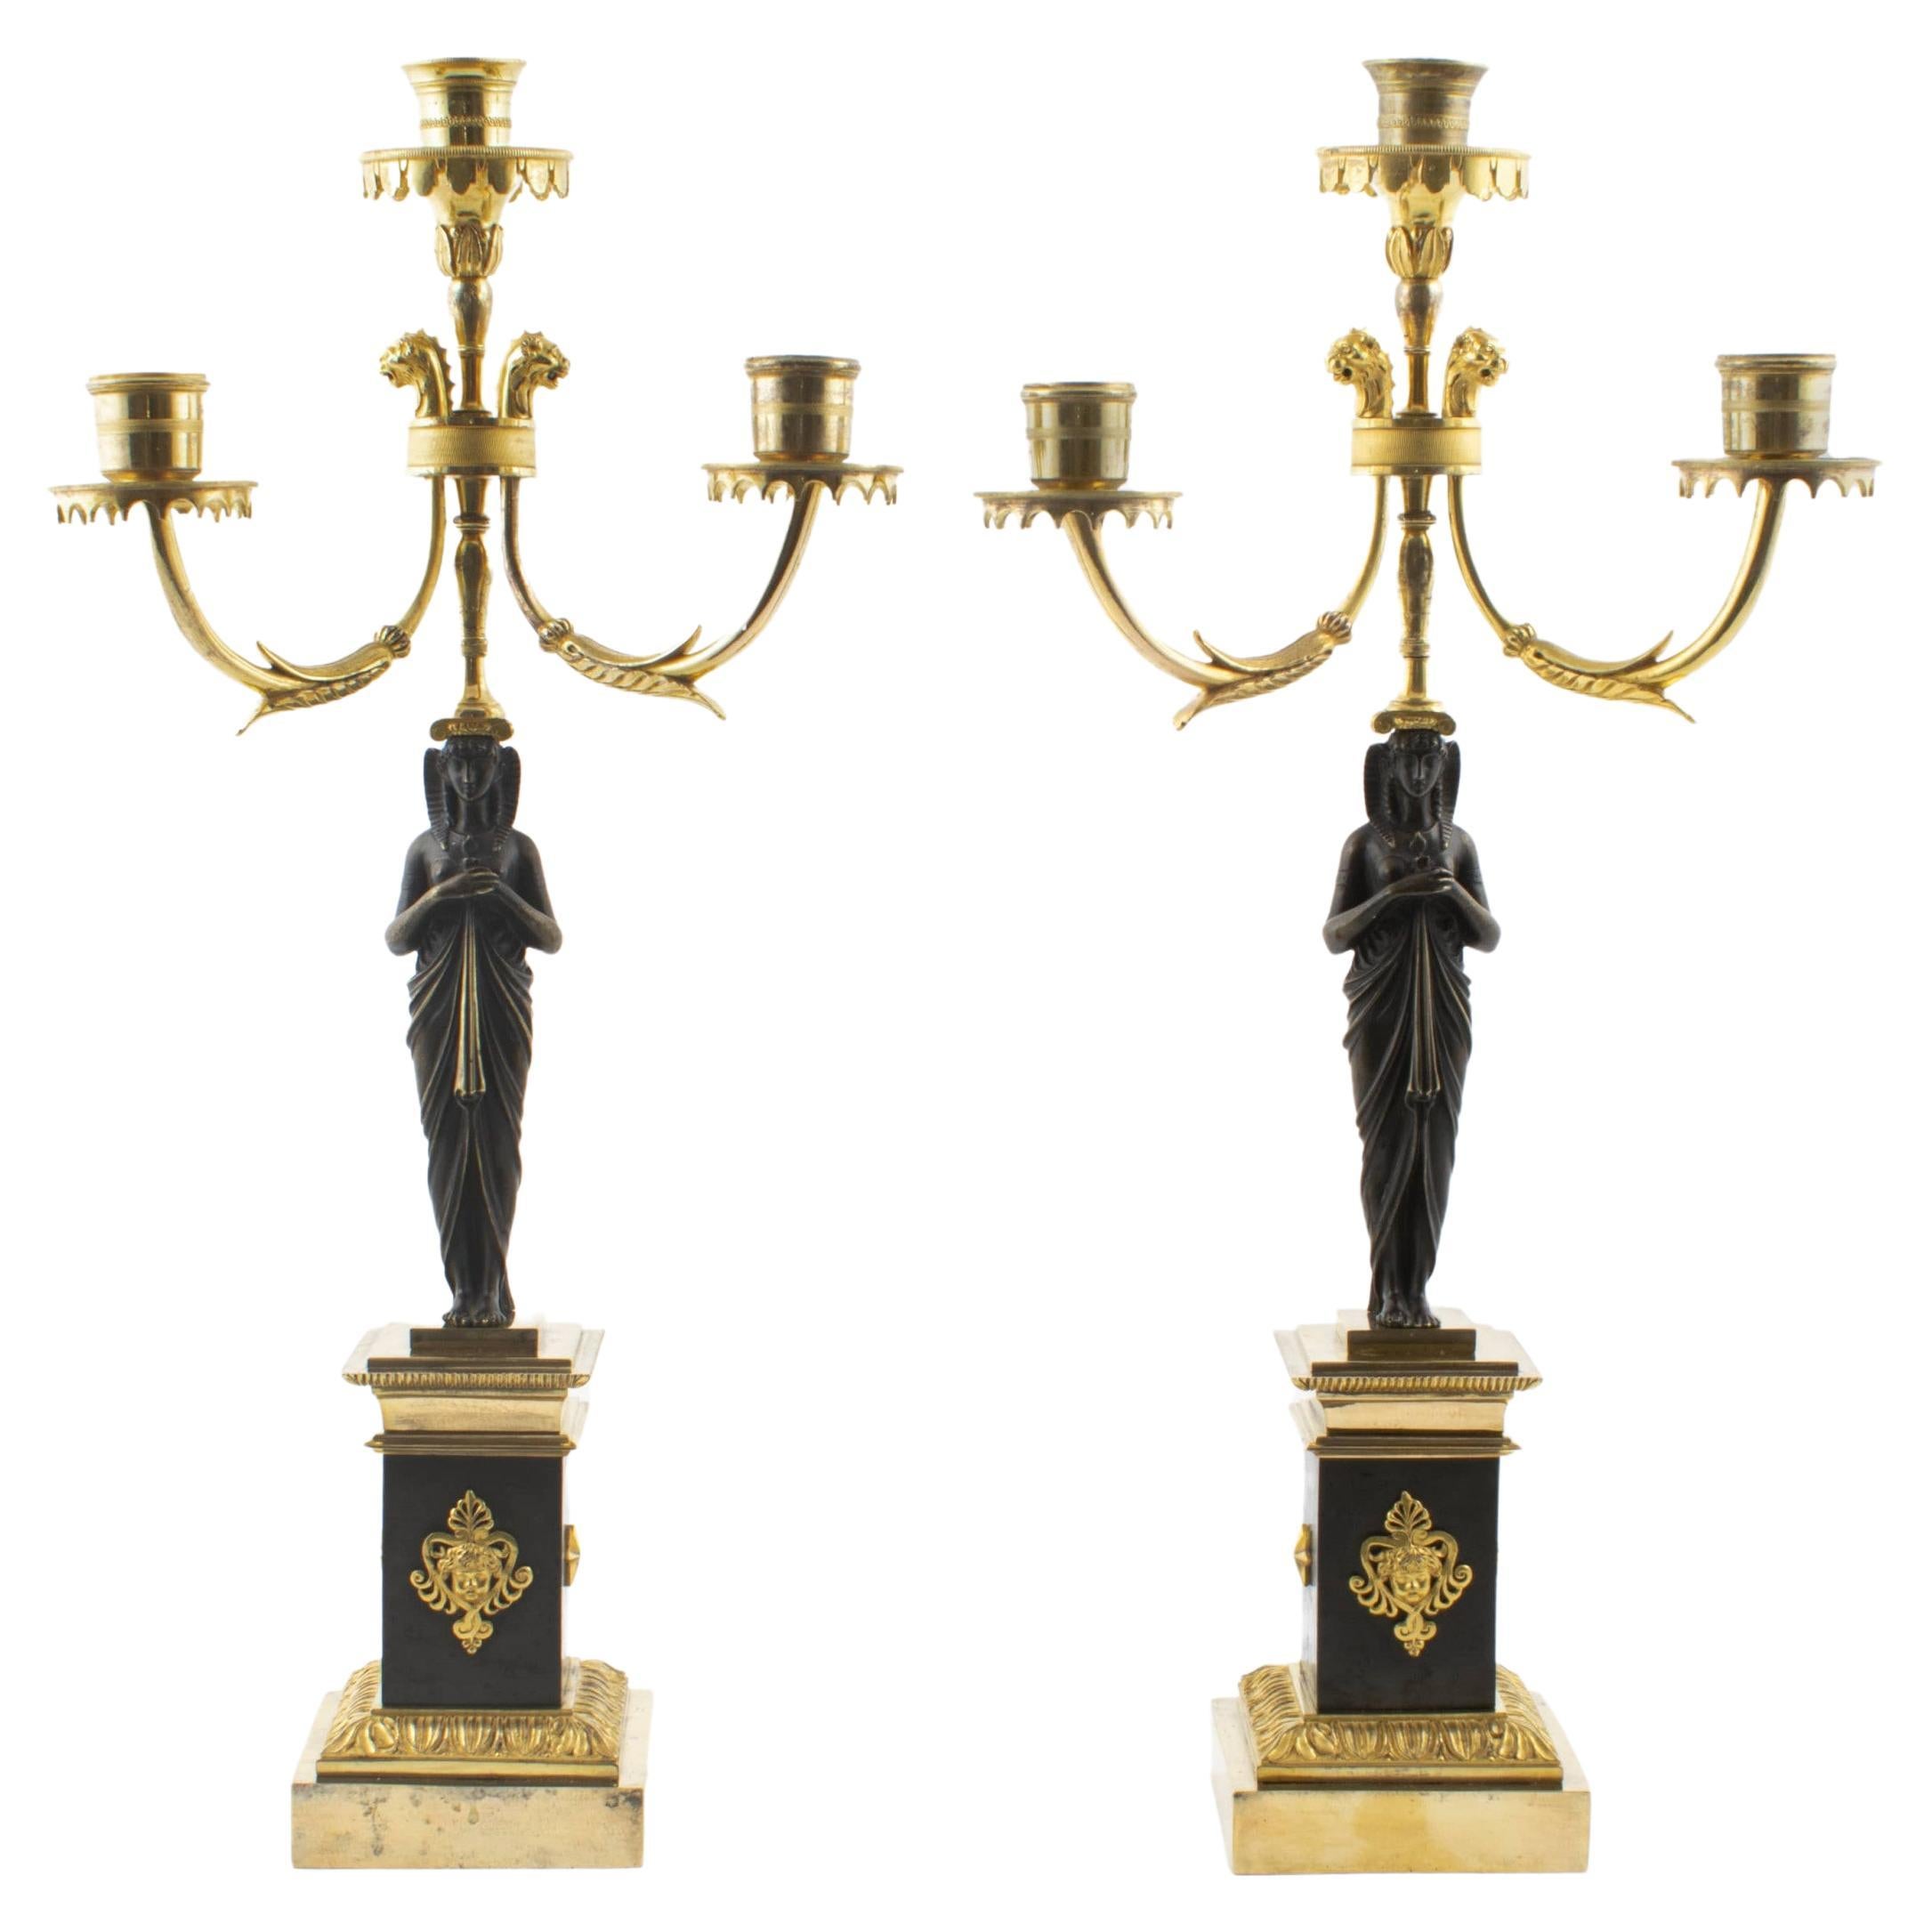 Pair of Large Antique French Empire Candelabras